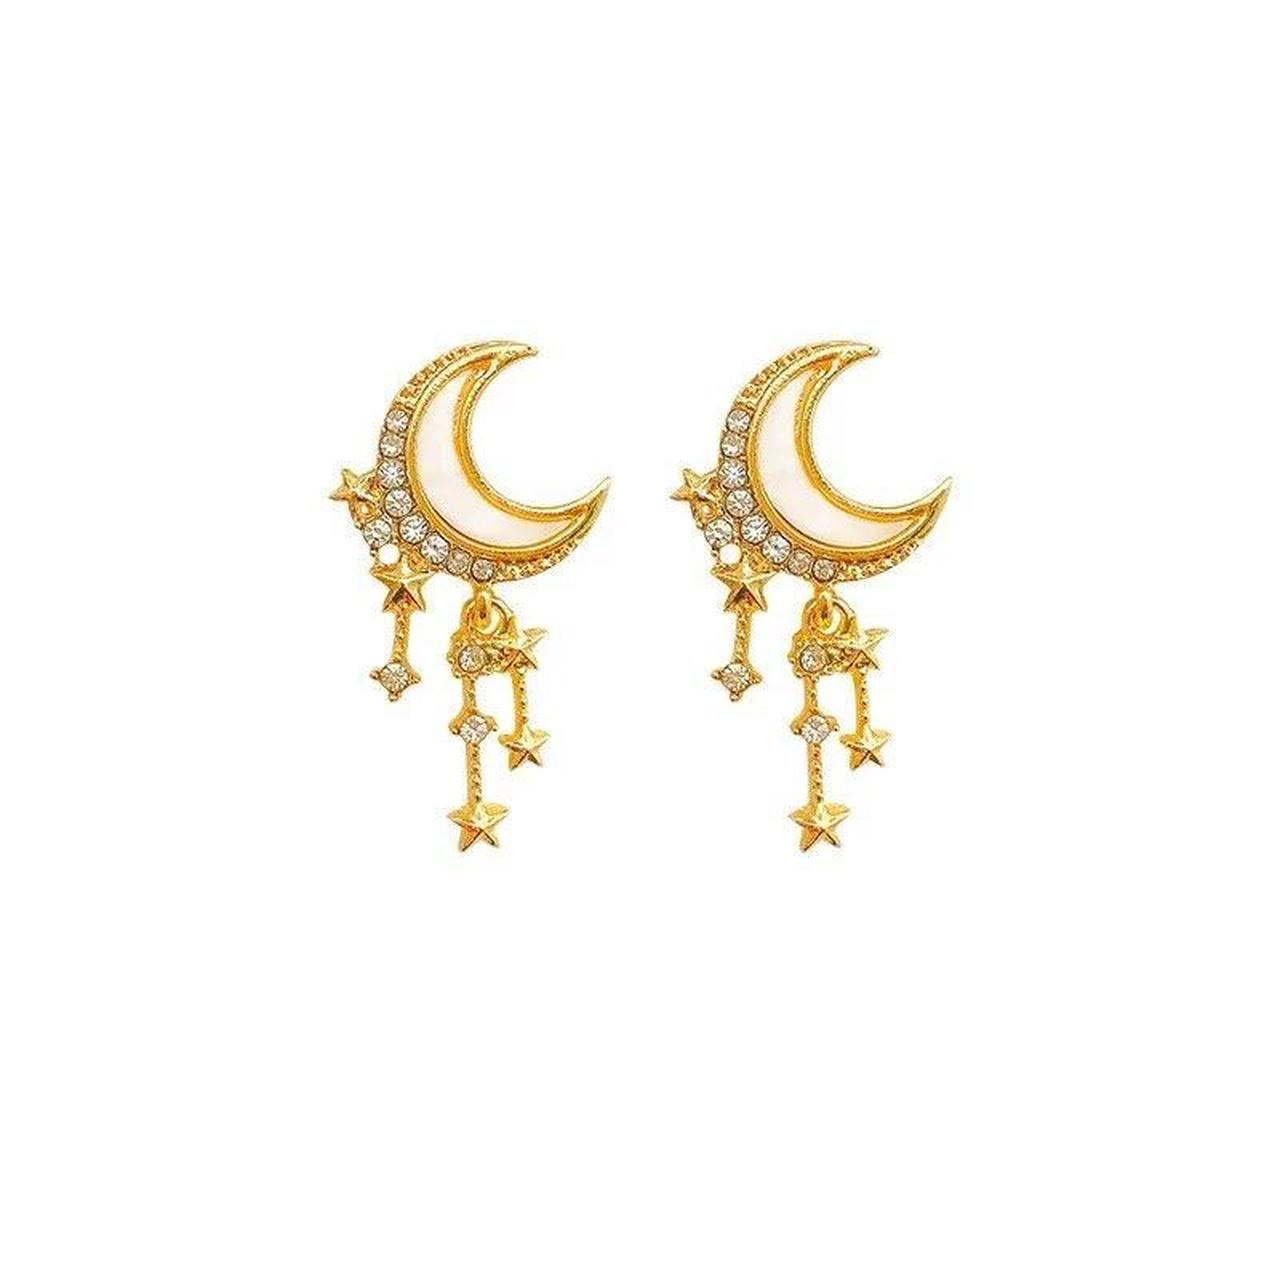 Gorgeous Dangling Moon and stars Earrings covered in... - Depop